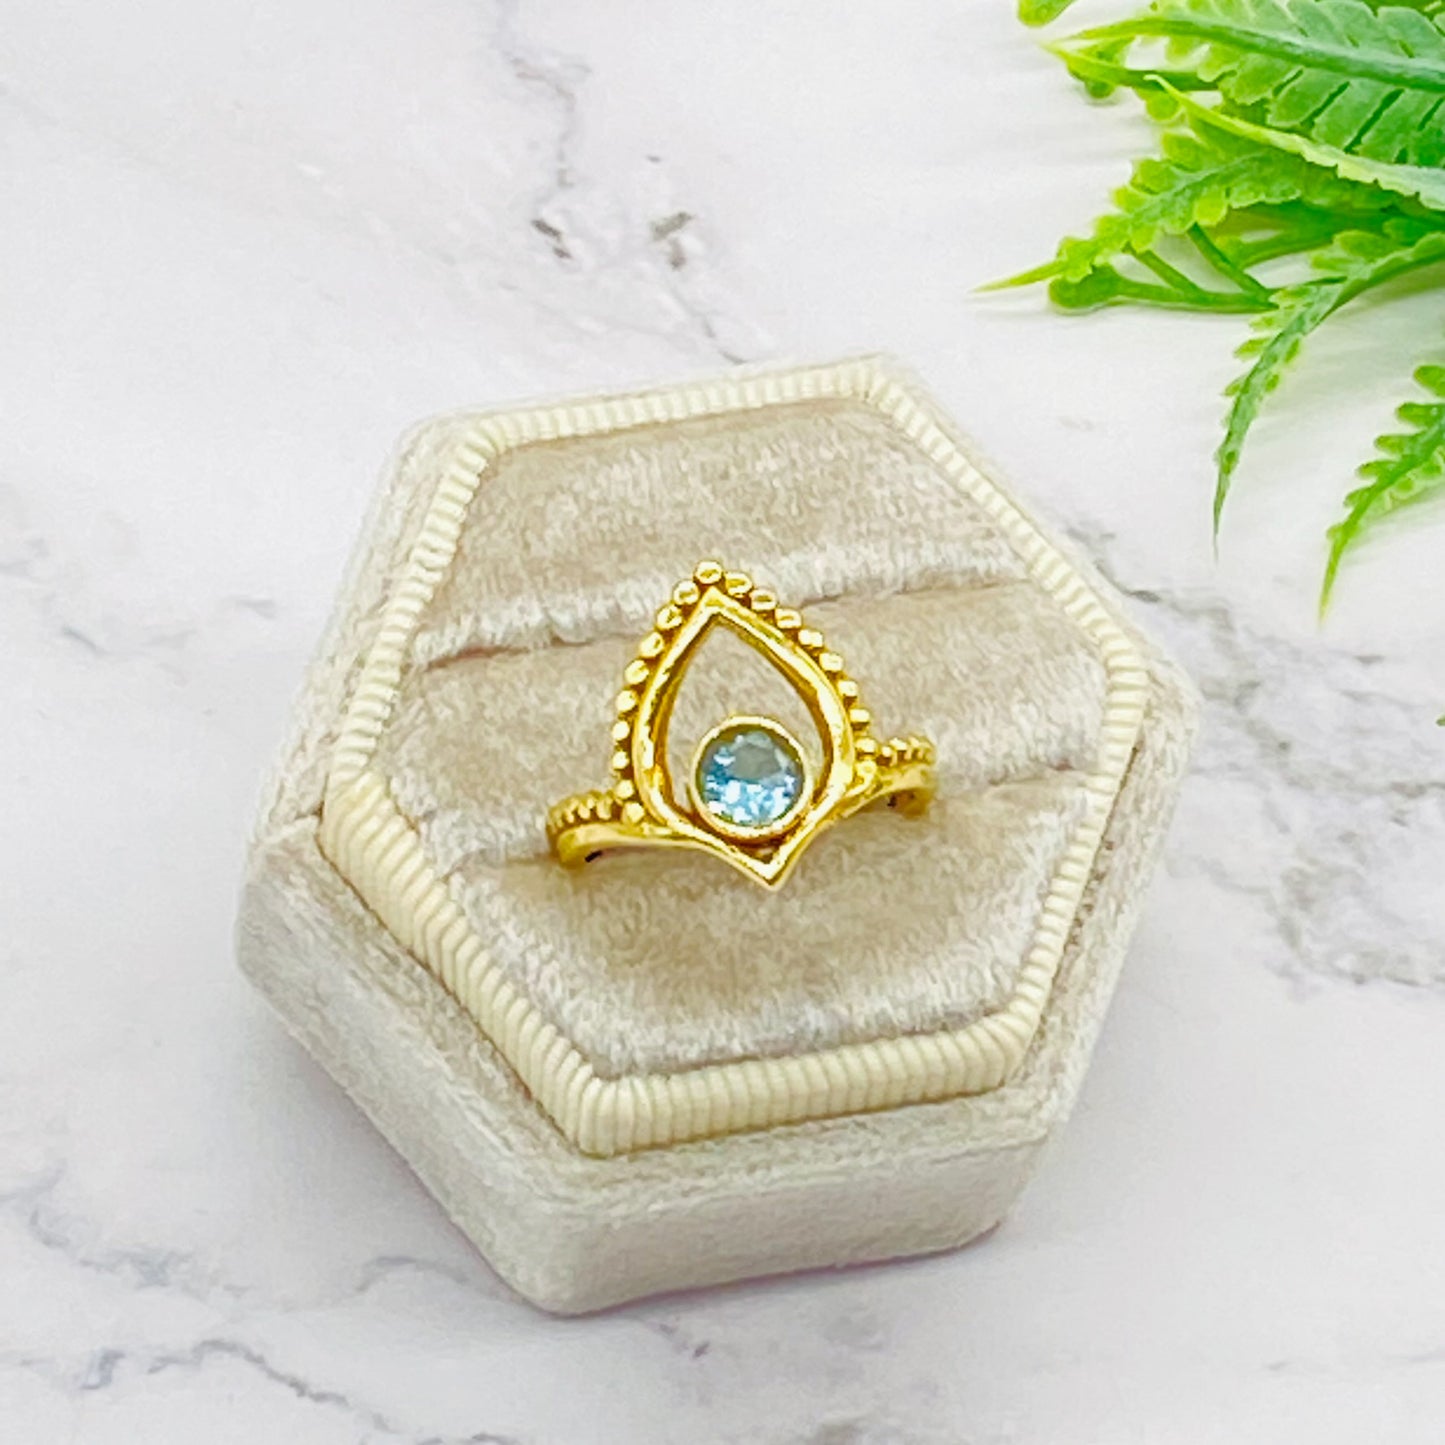 Gold Filled Crystal Ring, Handmade Ring, Gift For Her, Statement Ring, Gift for Mom, Statement Ring, Vintage Jewelry